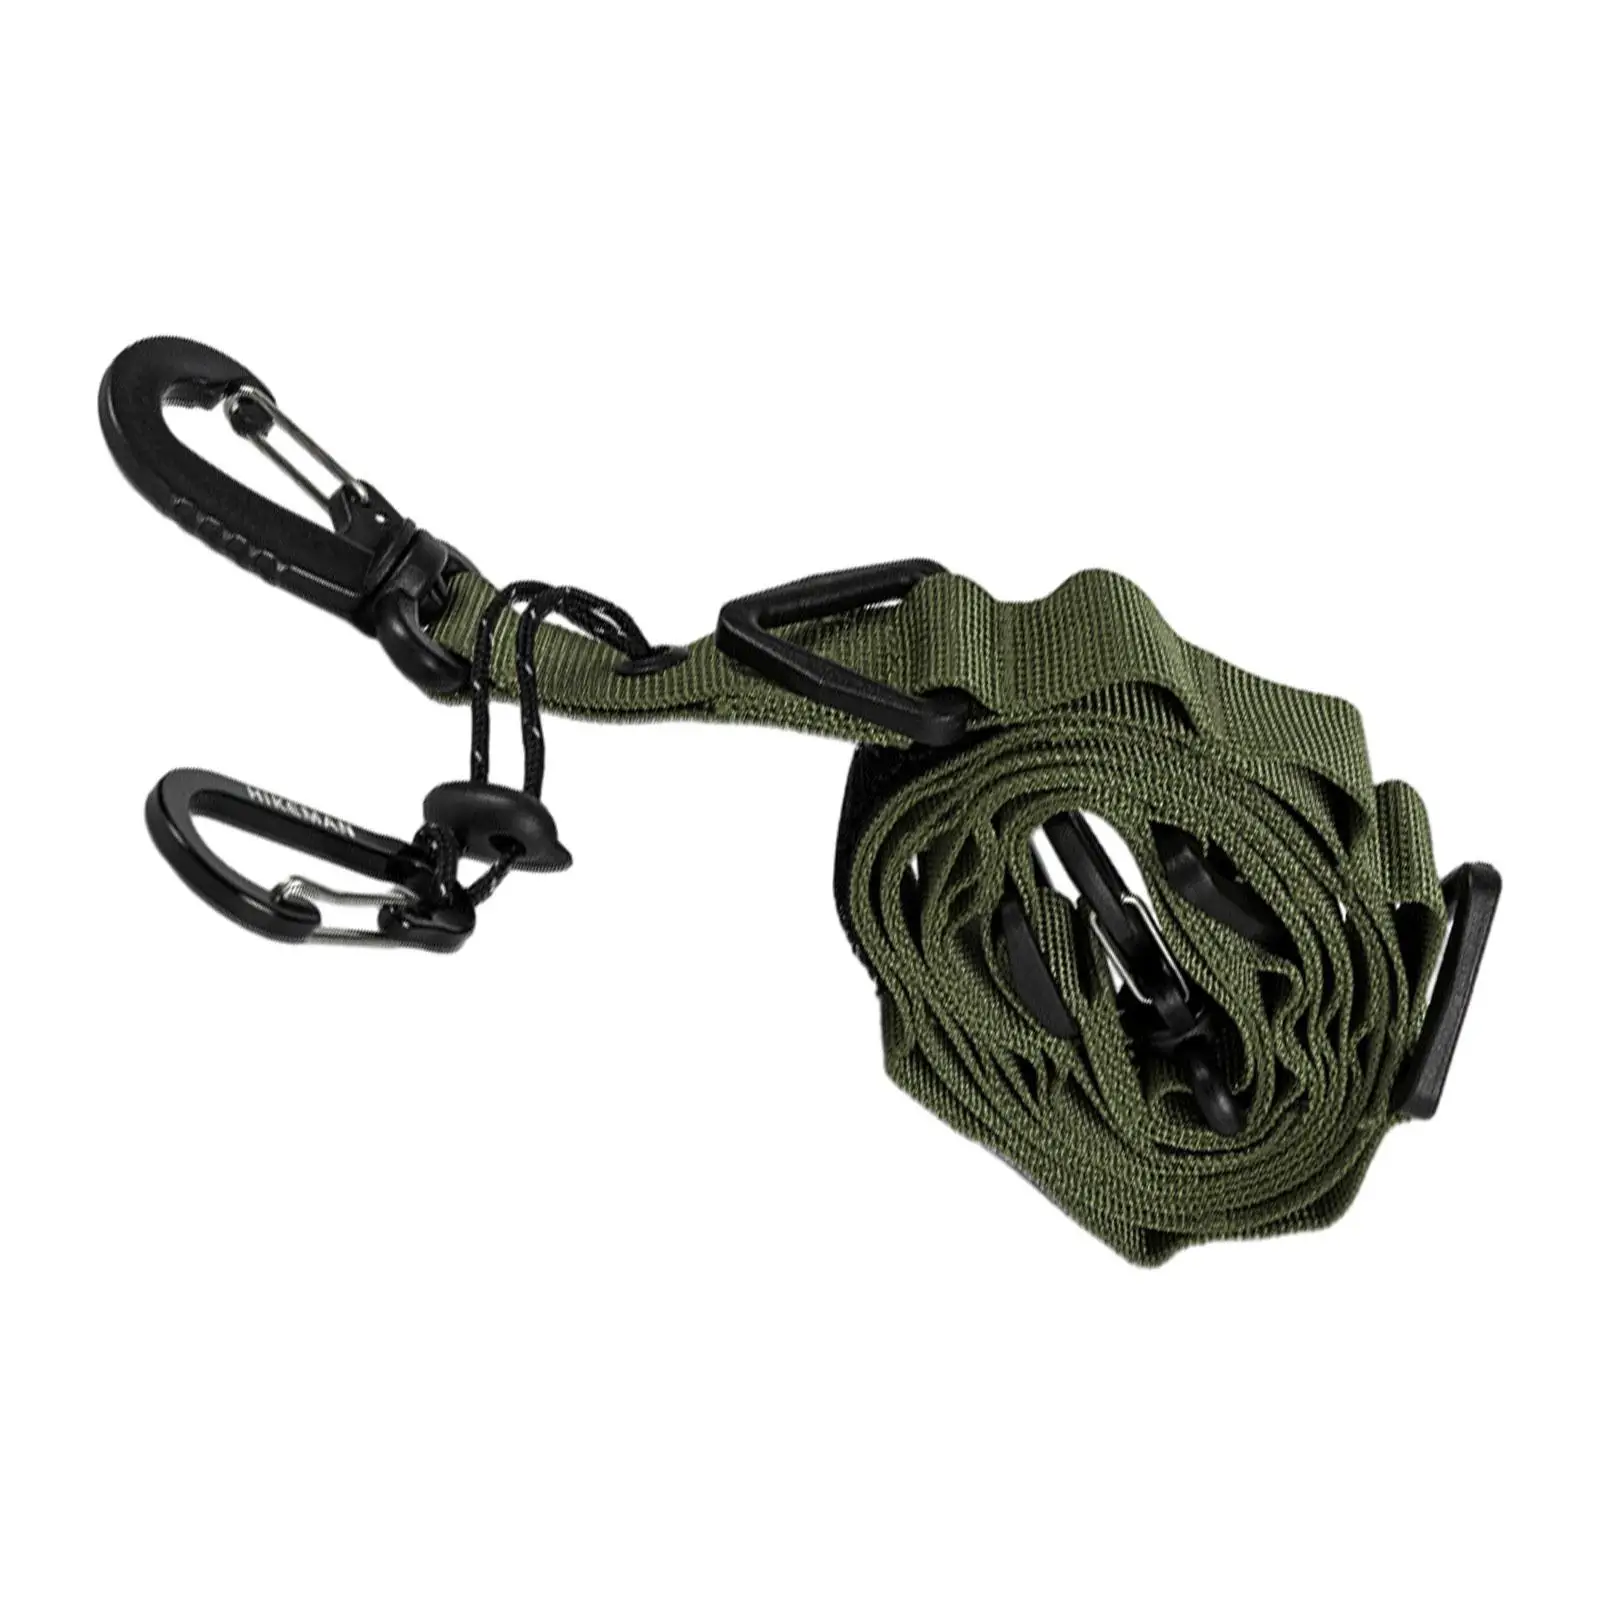 Campsite Storage Strap Outdoor Hanging Rope Clothesline Camping Lanyard Hanger Crossbody Shoulder Strap for Cookware Climbing